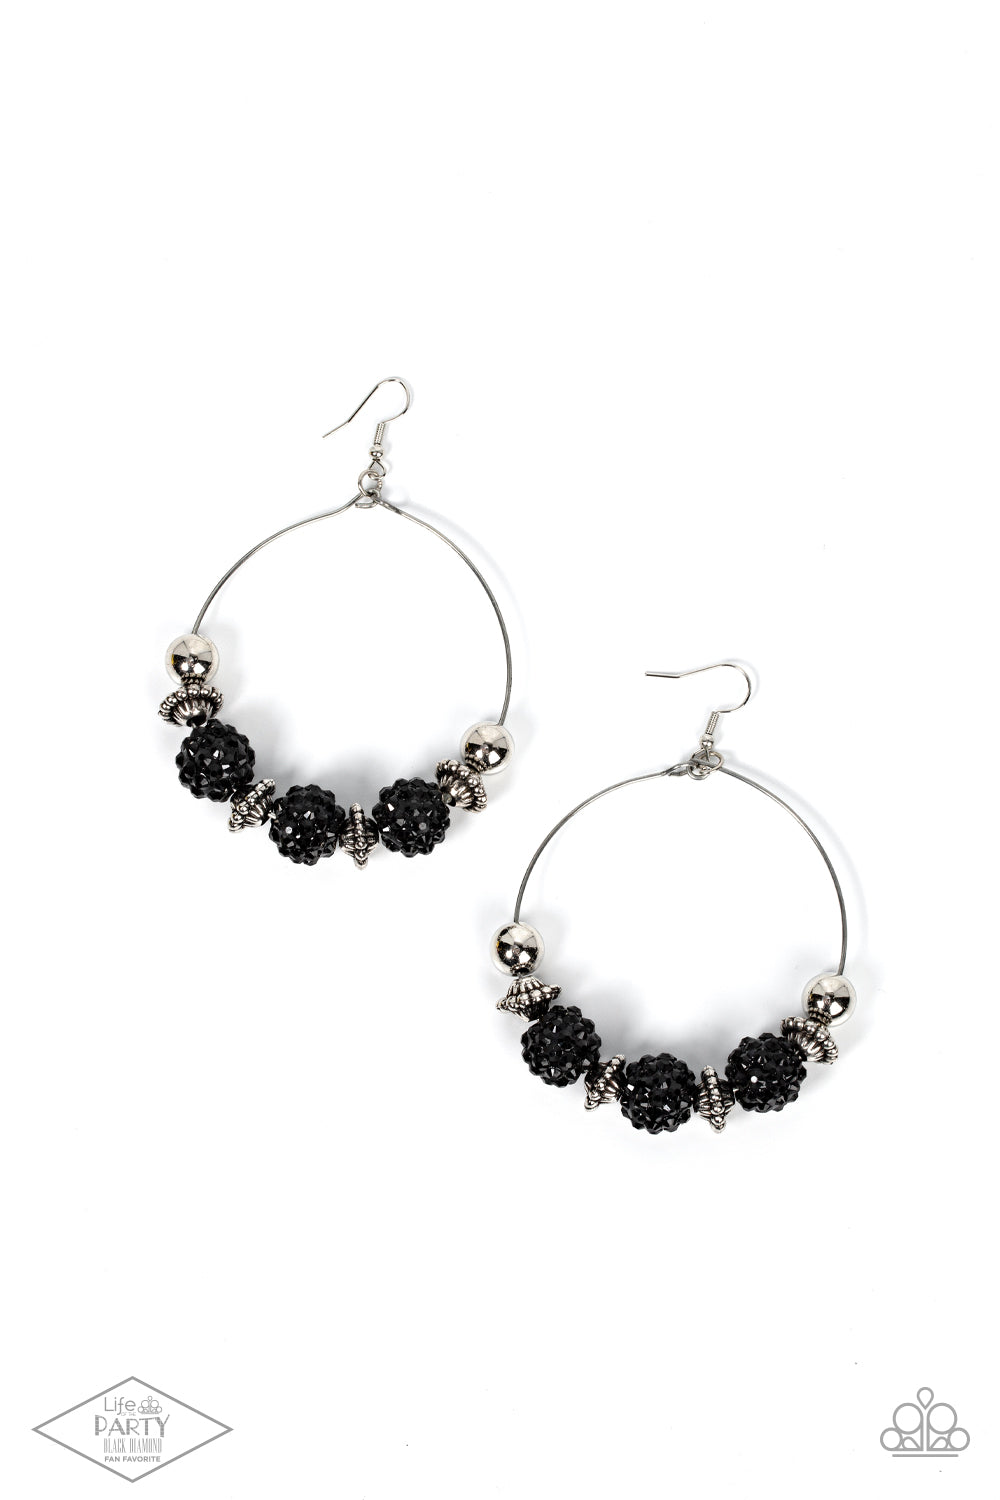 I Can Take a Compliment Black Earring - Paparazzi Accessories  A stunning array of studded silver accents, oversized silver beads, and black rhinestone encrusted beads are threaded along a dainty silver wire hoop, resulting in a dazzling pop of color. Earring attaches to a standard fishhook fitting.  Sold as one pair of earrings.  This Fan Favorite is back in the spotlight at the request of our 2021 Life of the Party member with Black Diamond Access, Crystal R.